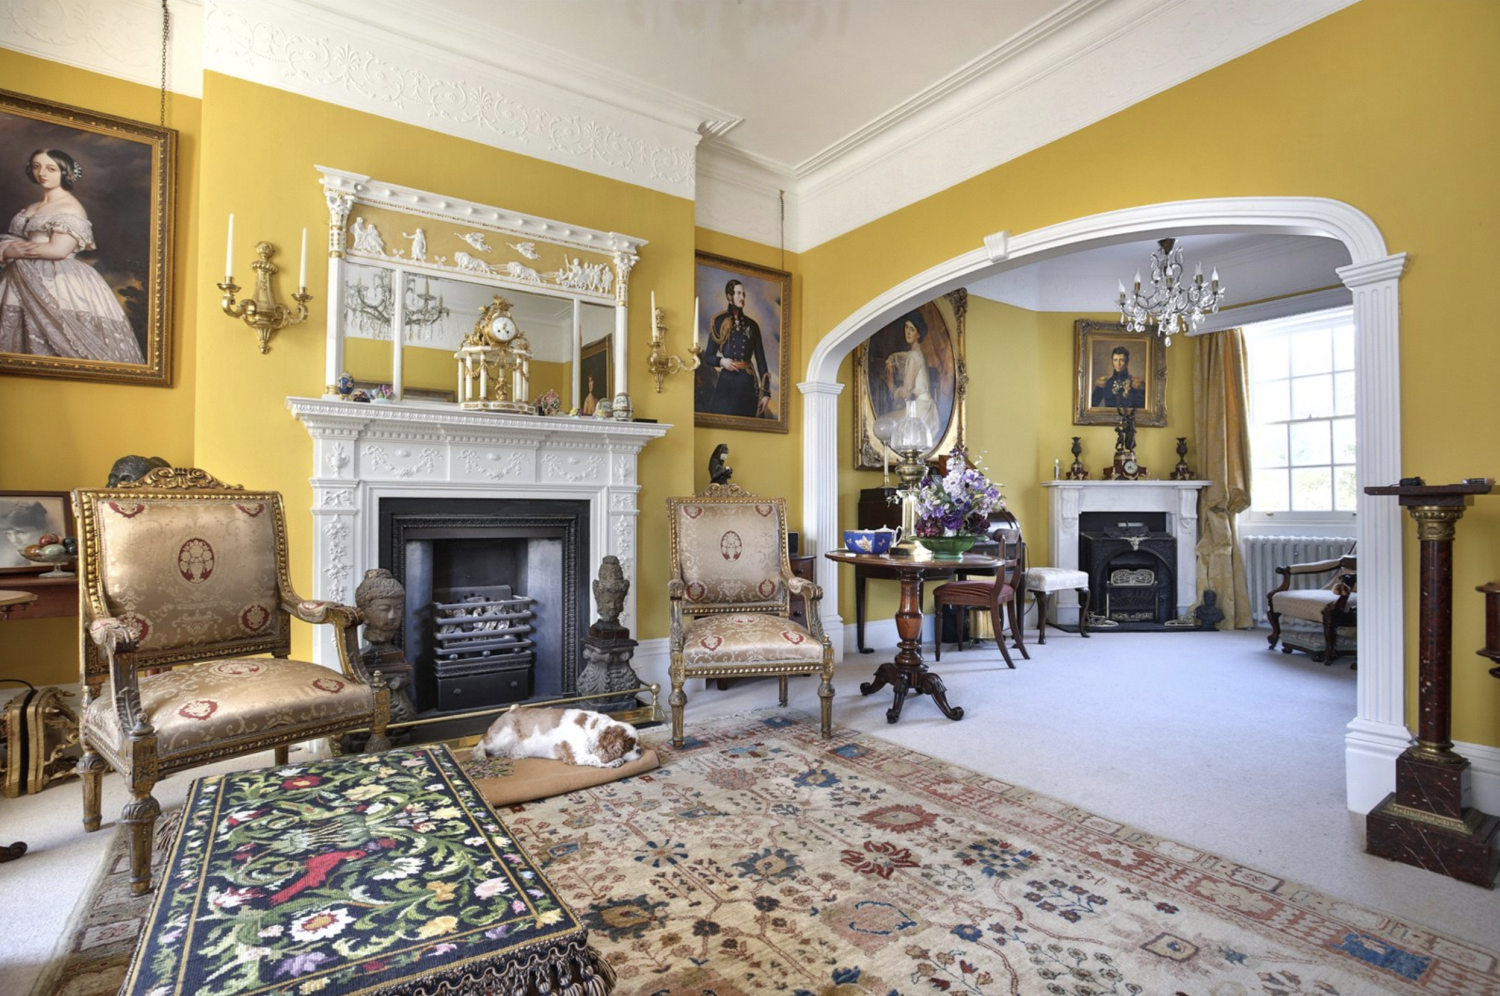 Interior of a Regency-era drawing room painted in mustard yellow, with cornicing and gild-framed paintings and chandeliers hanging above